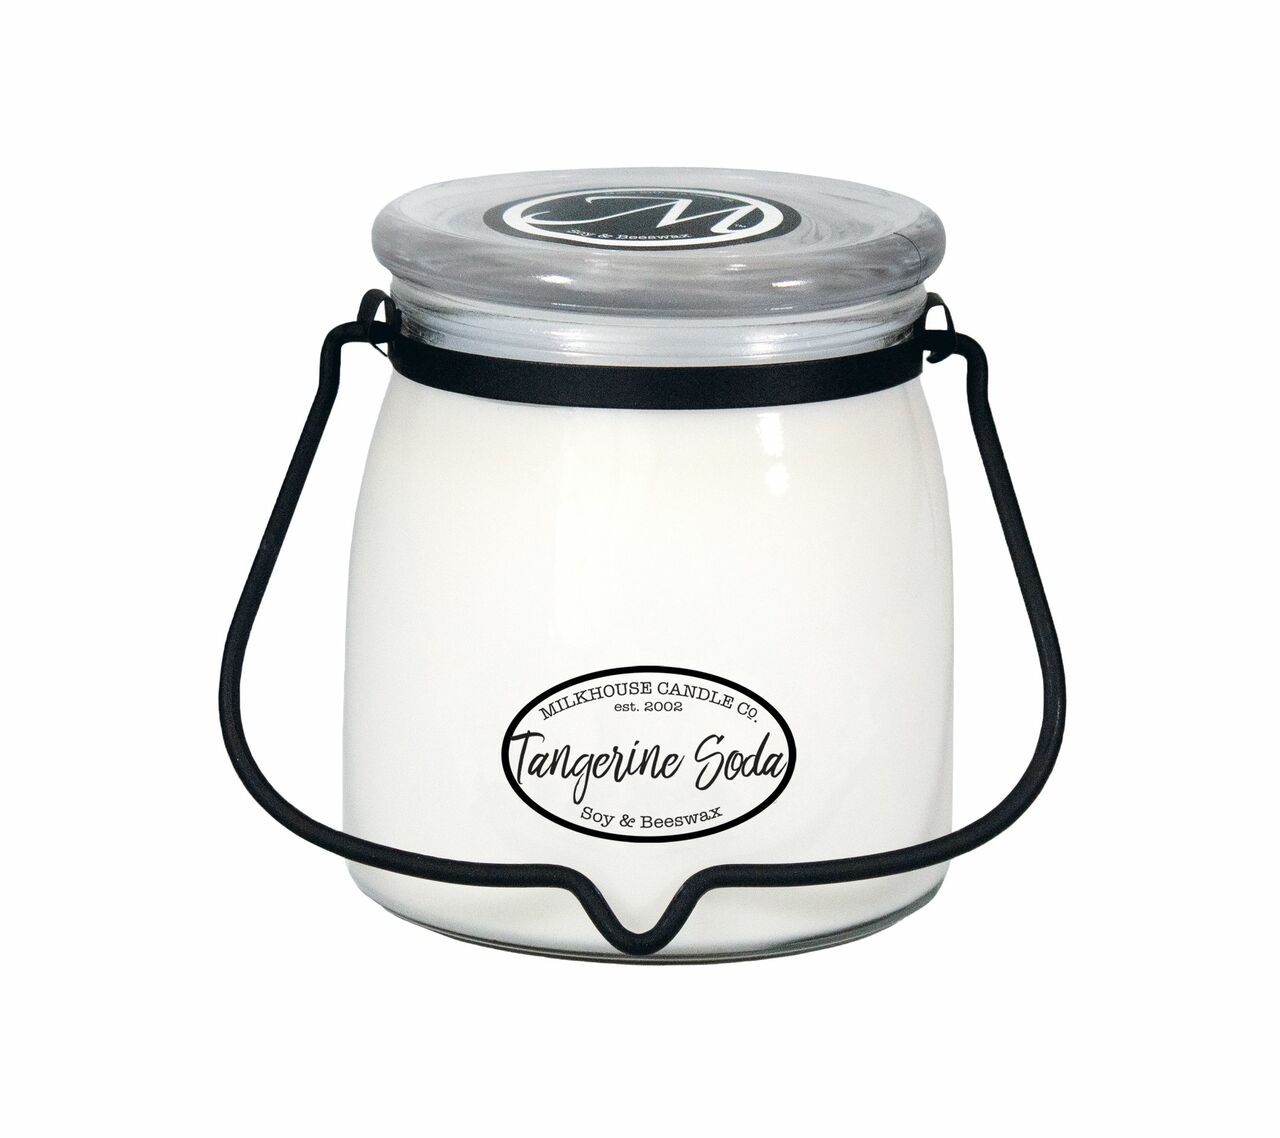 Tangerine Soda 16oz Butter Jar Candle by Milkhouse Candle Co.